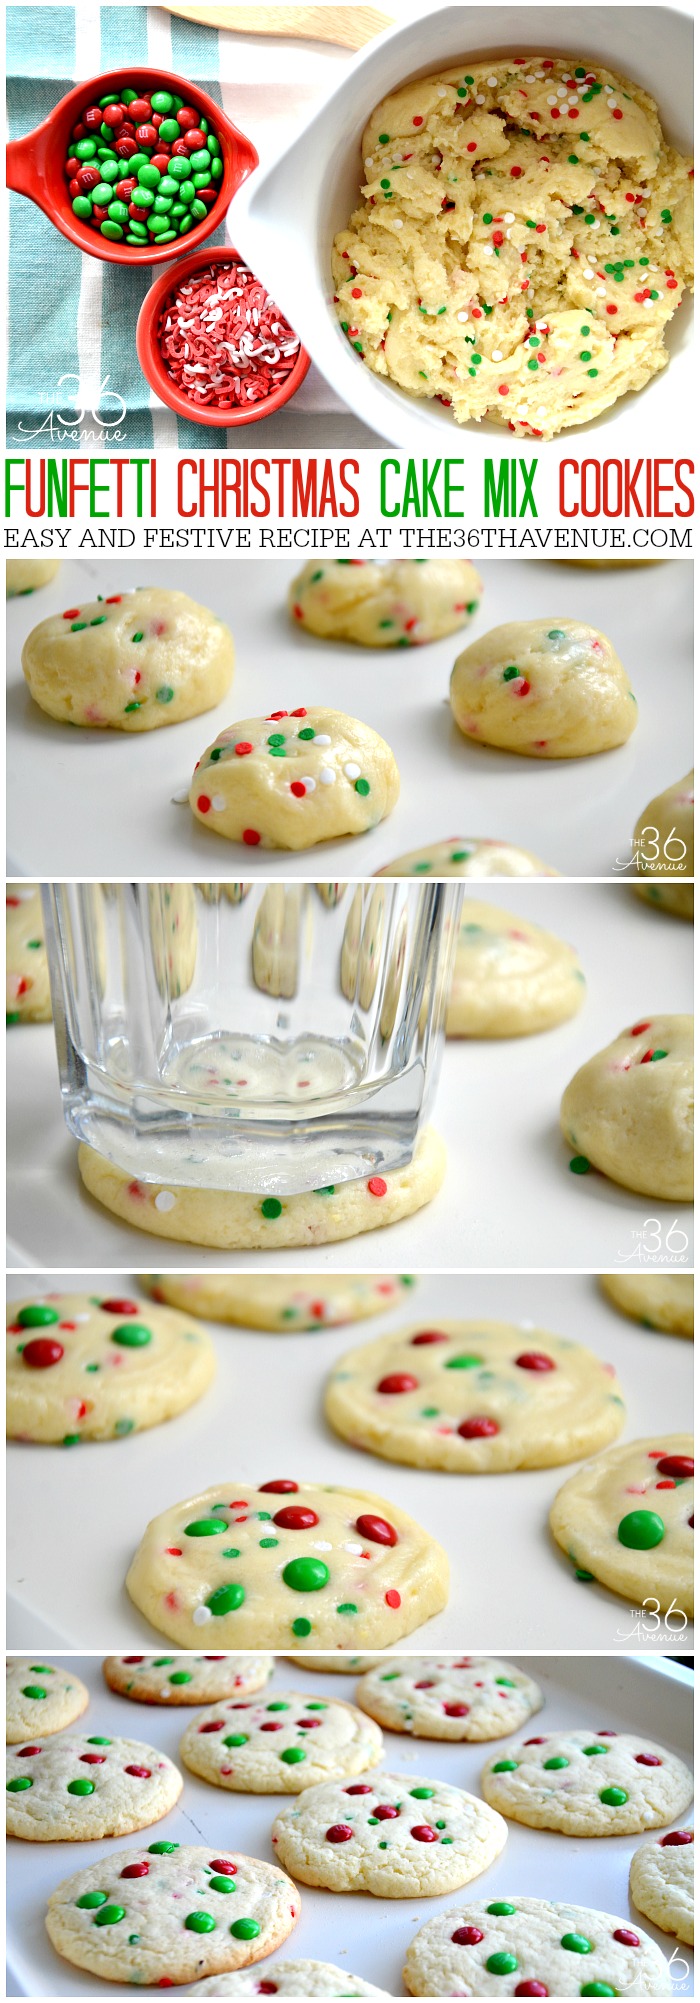 Christmas Cookie Recipe at the36thavenue.com